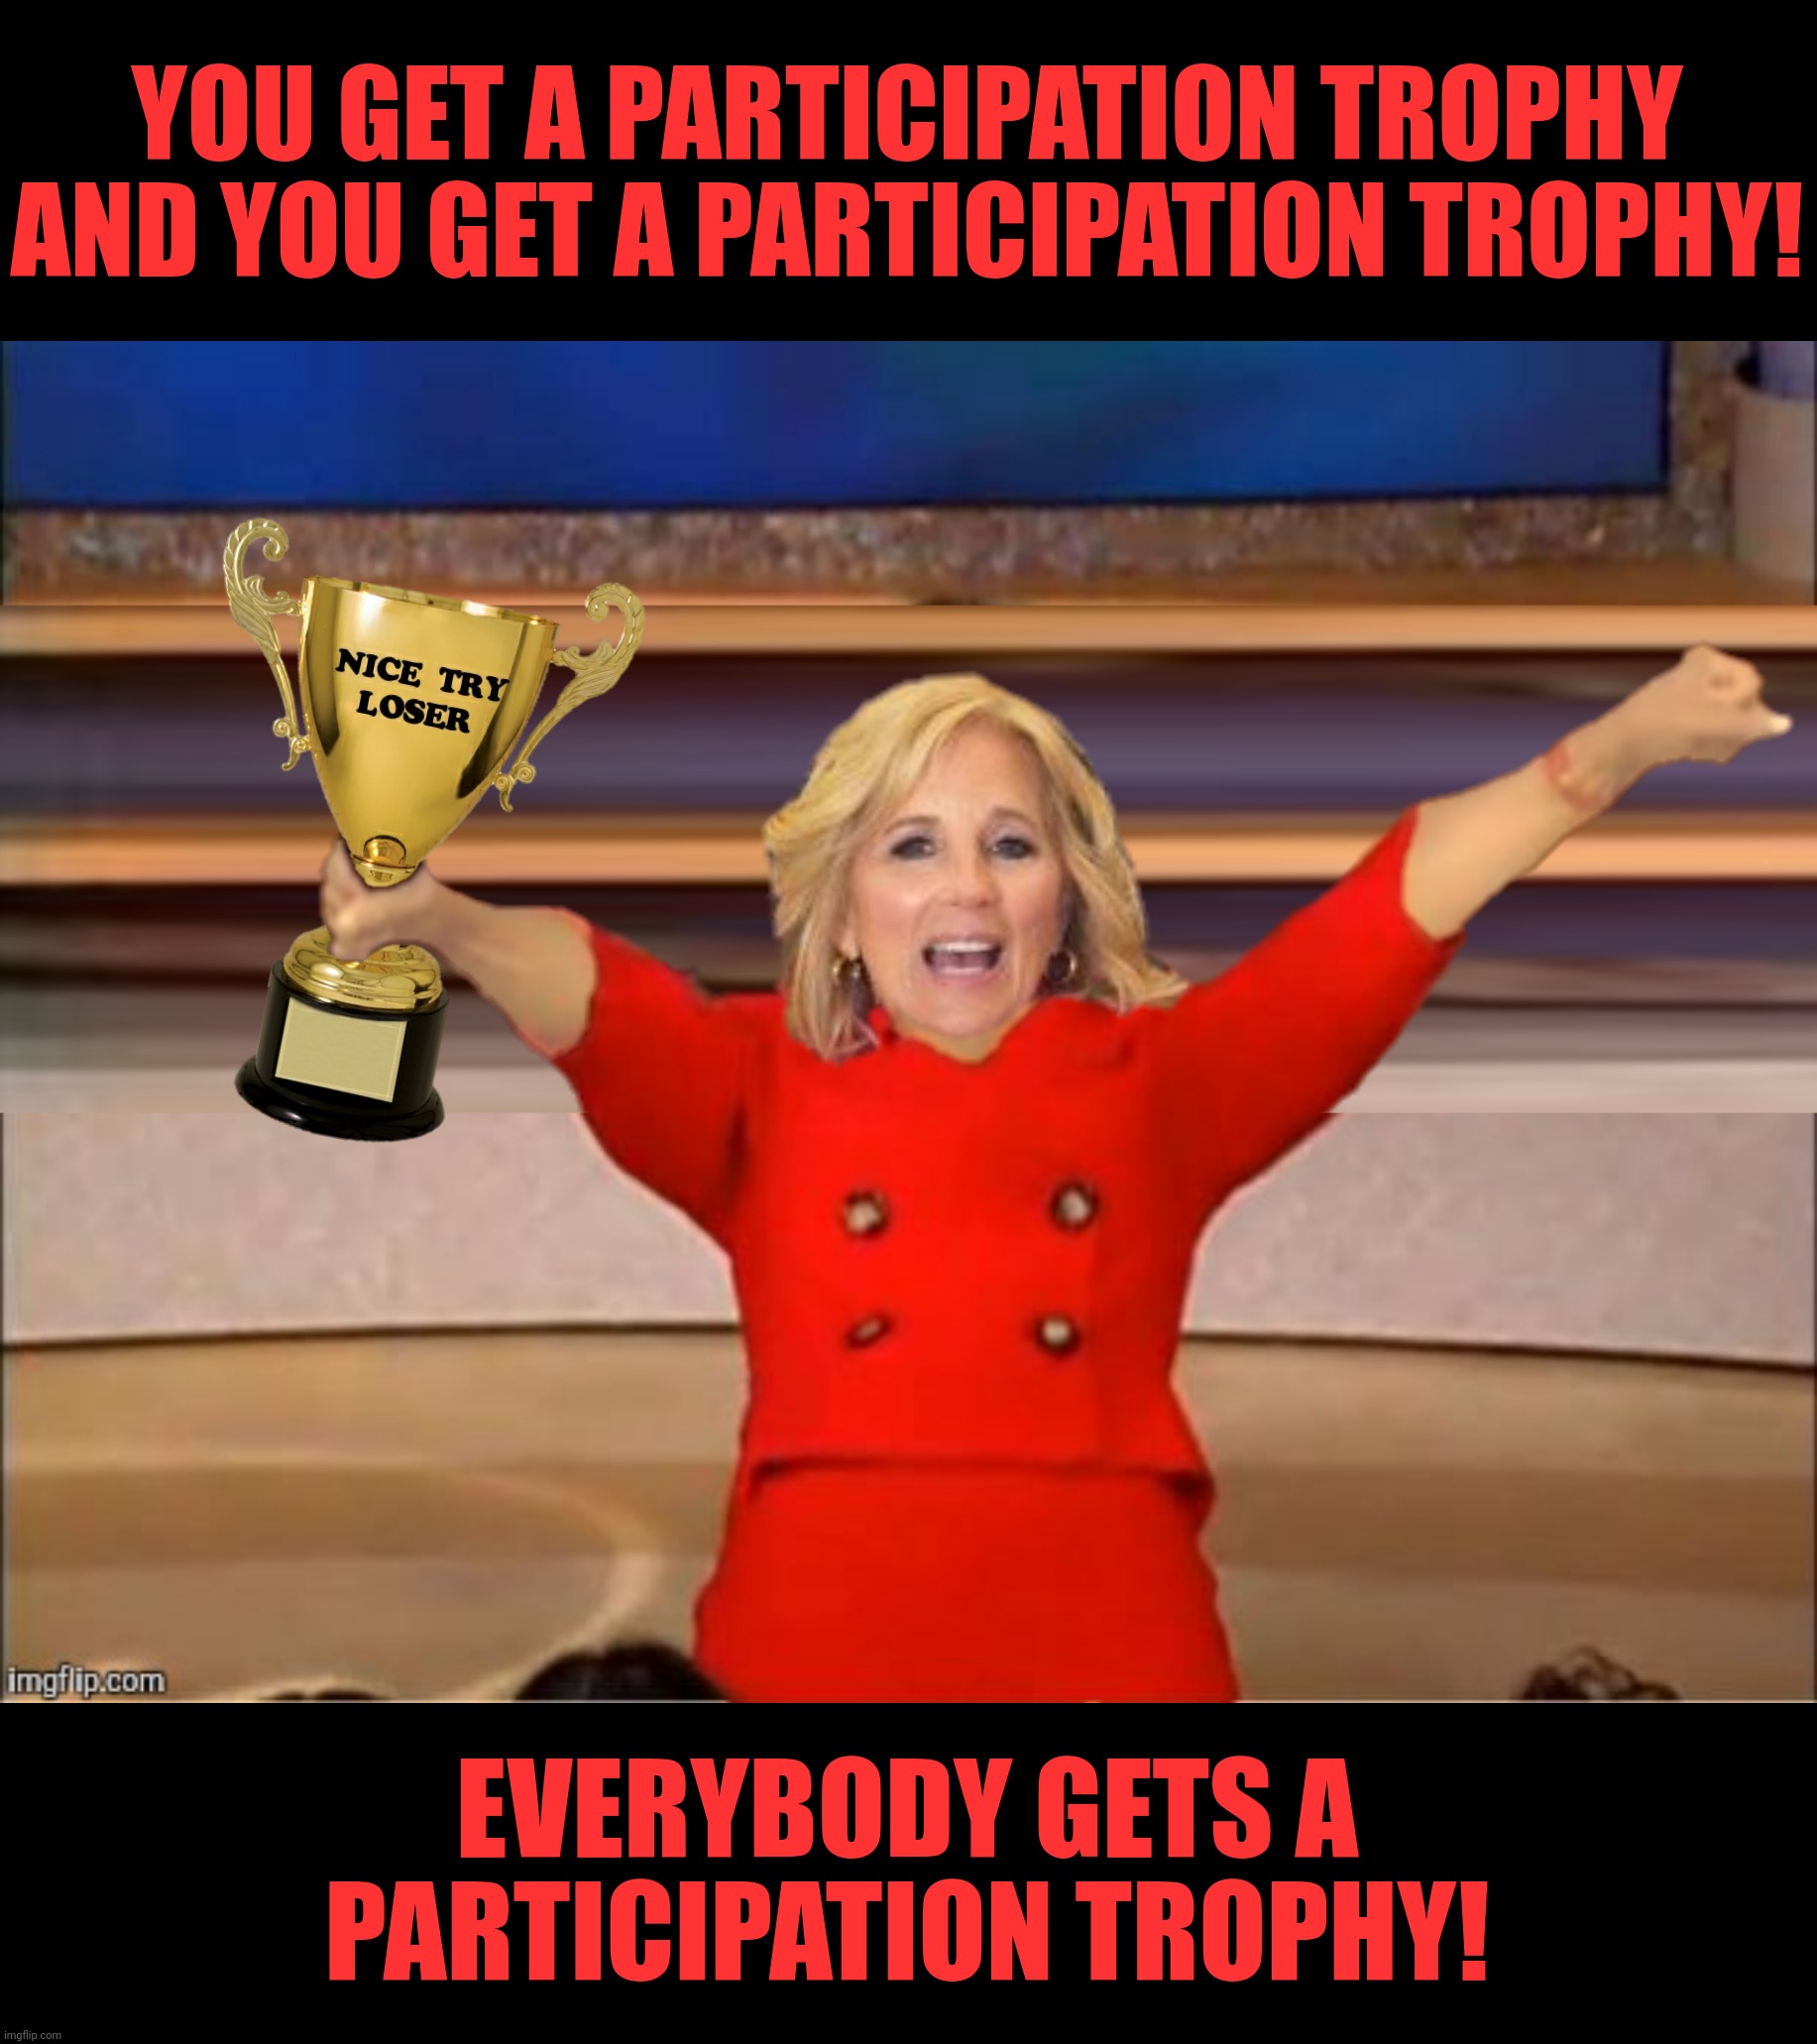 Bad Photoshop Sunday presents:  Sportsmanship | YOU GET A PARTICIPATION TROPHY AND YOU GET A PARTICIPATION TROPHY! EVERYBODY GETS A PARTICIPATION TROPHY! | image tagged in bad photoshop sunday,jill biden,oprah you get a,participation trophy | made w/ Imgflip meme maker